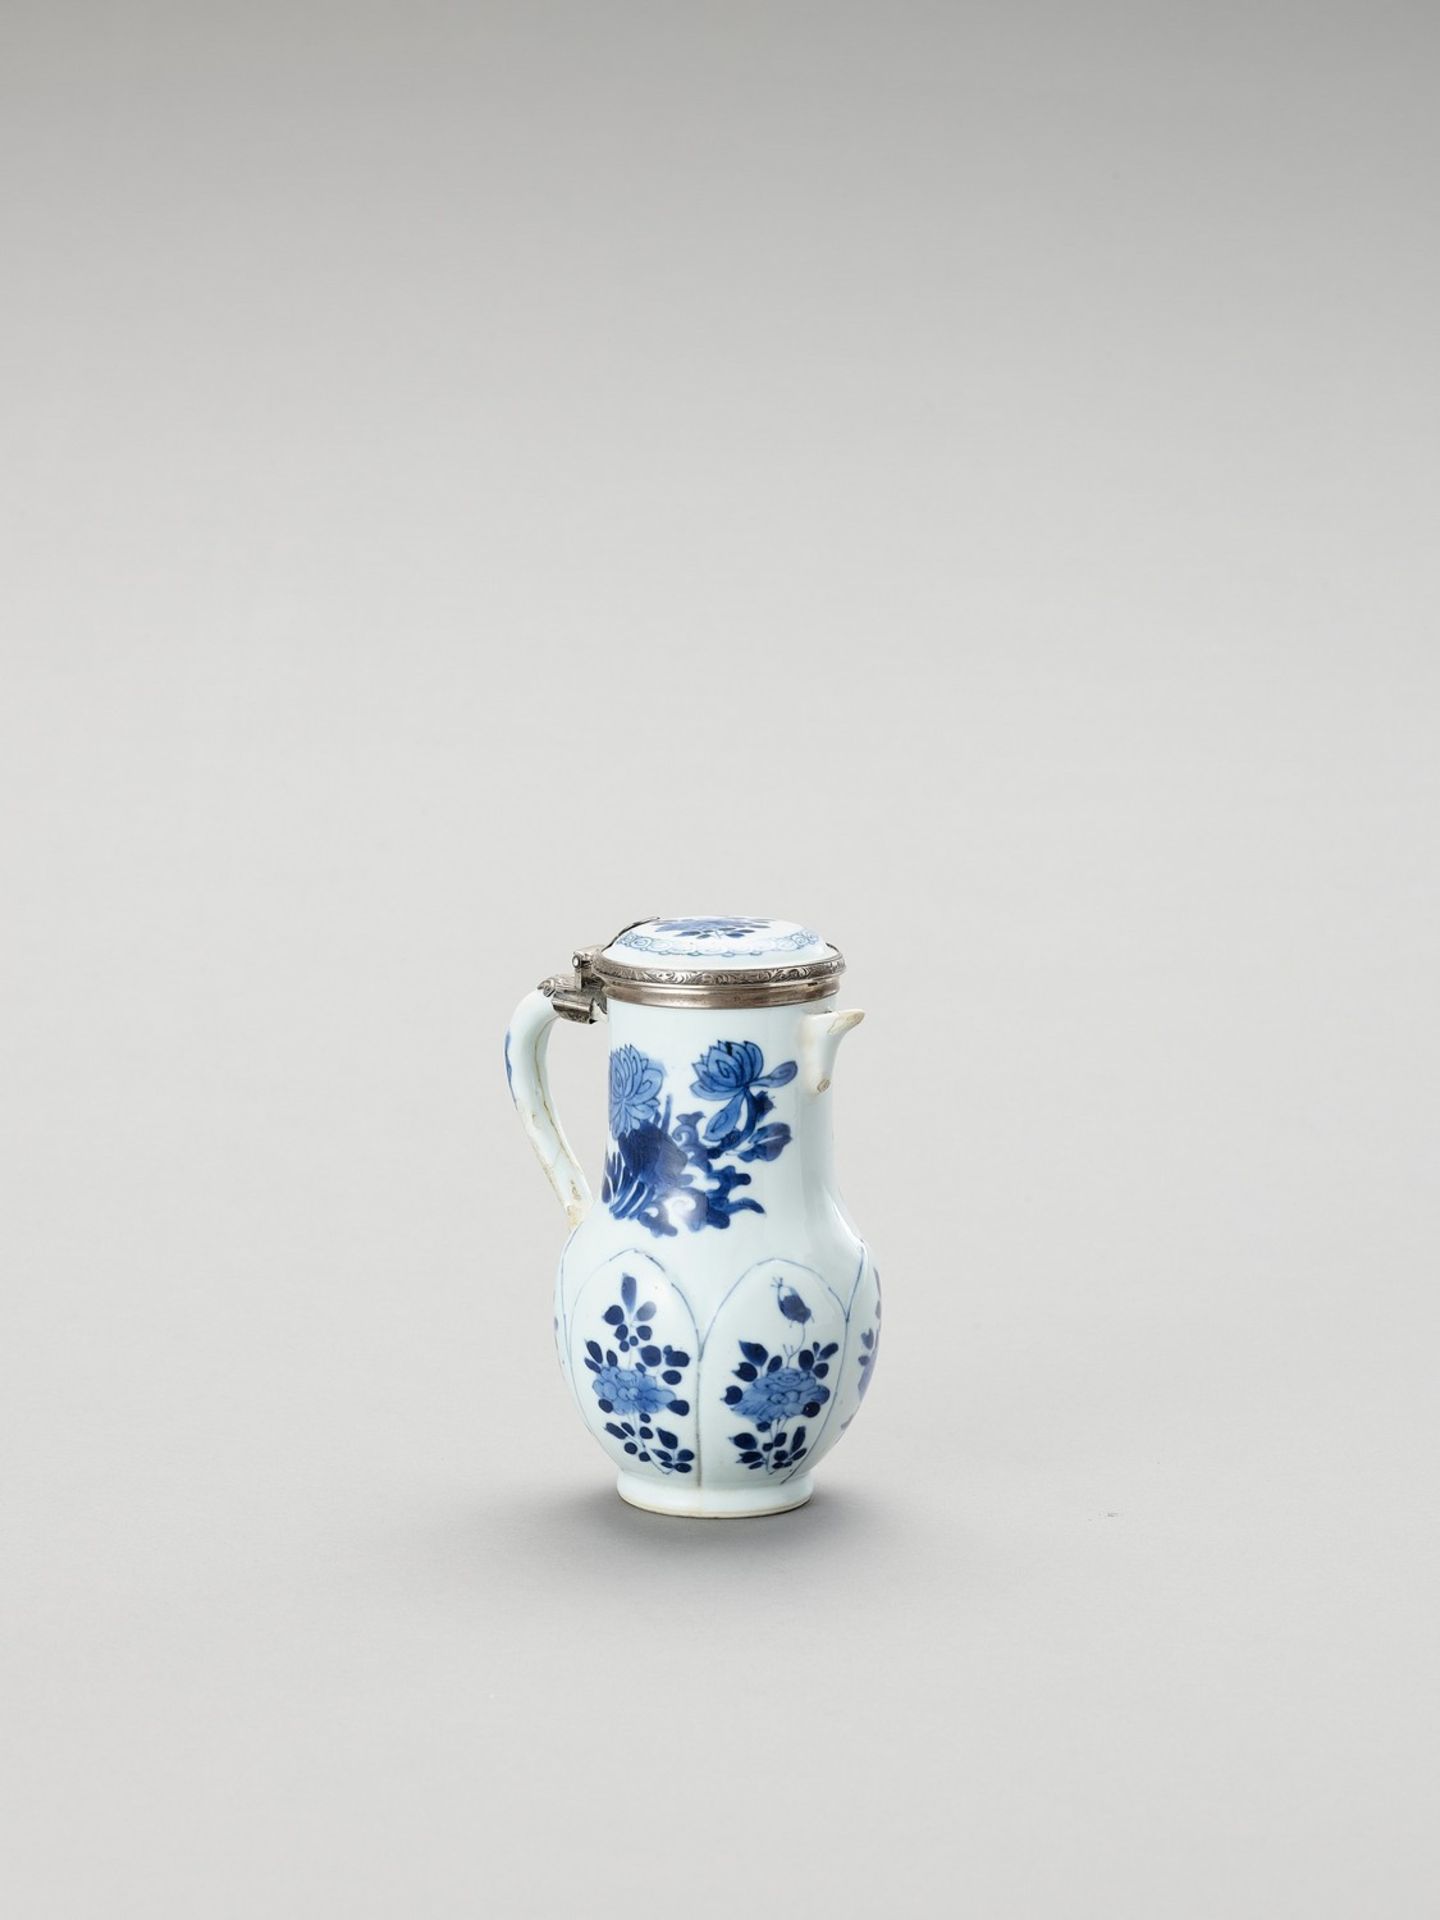 A SILVER-MOUNTED BLUE AND WHITE PORCELAIN JUG